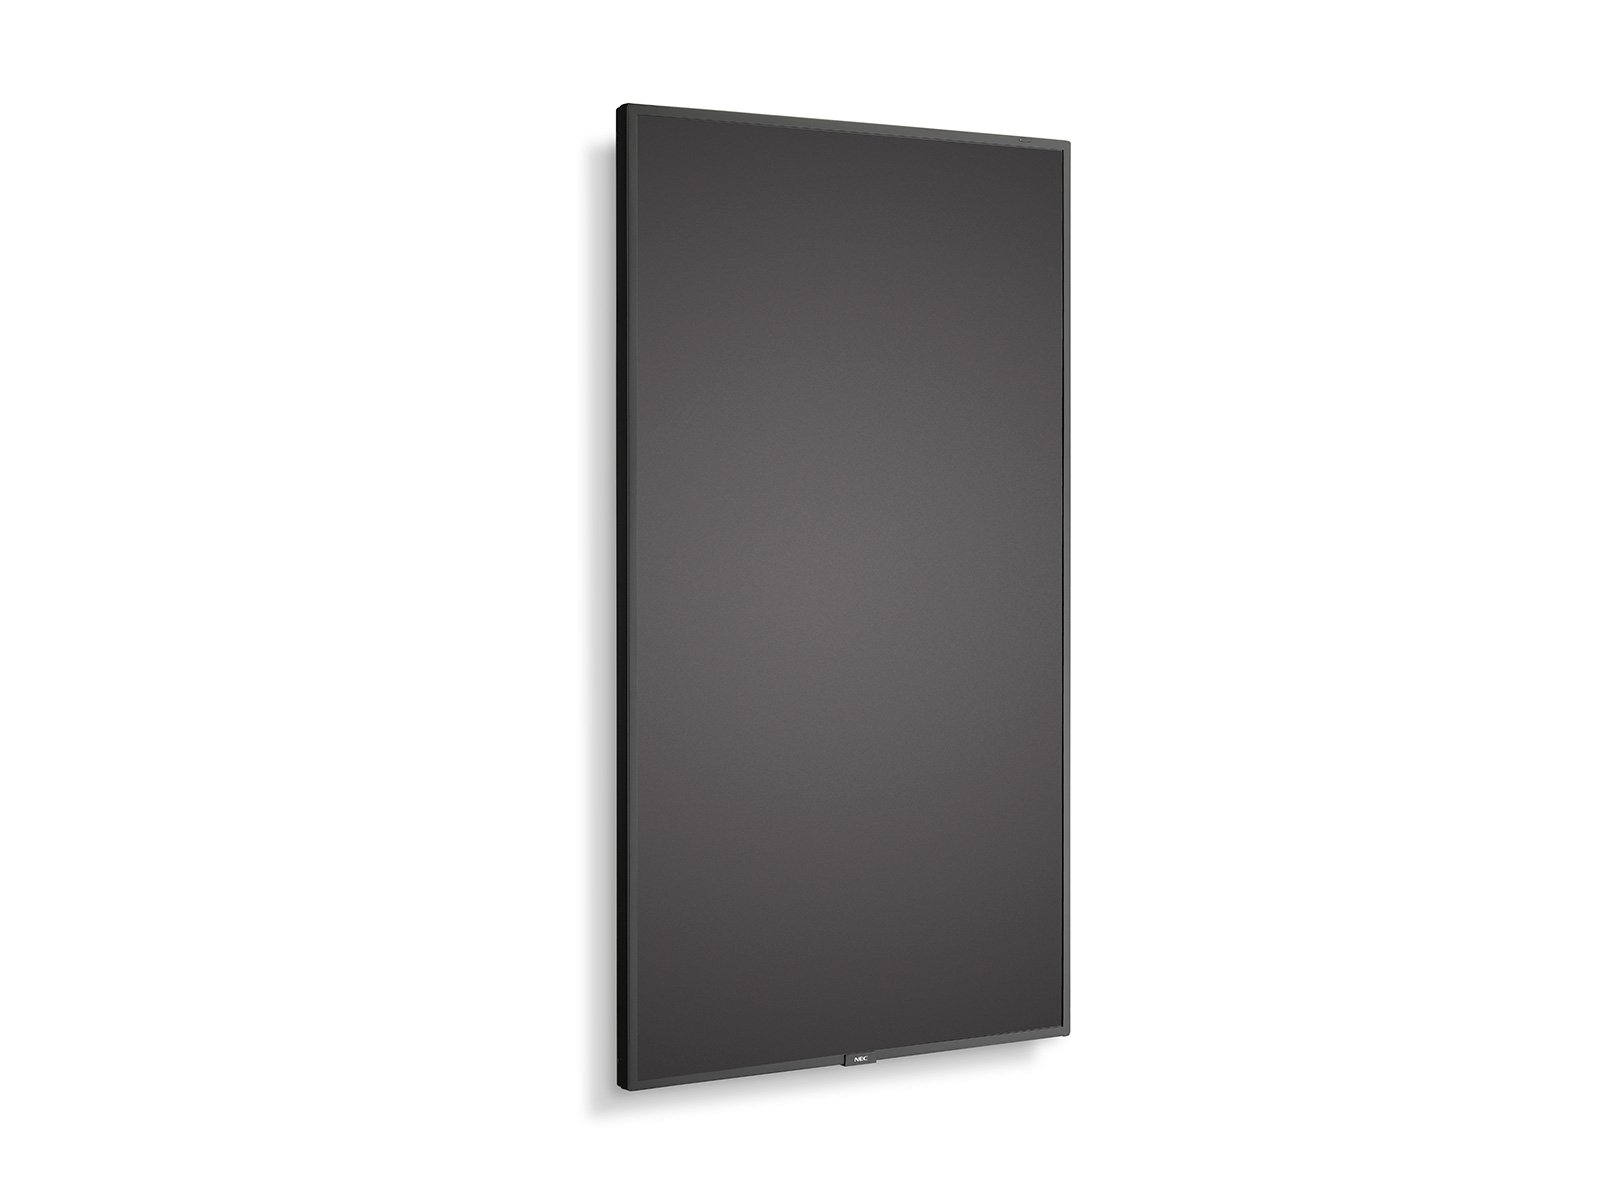 NEC MultiSync ME501 - 50 Zoll - 400 cd/m² - Ultra-HD - 3840x2160 Pixel - 18/7 - Message Essential Large Format Display